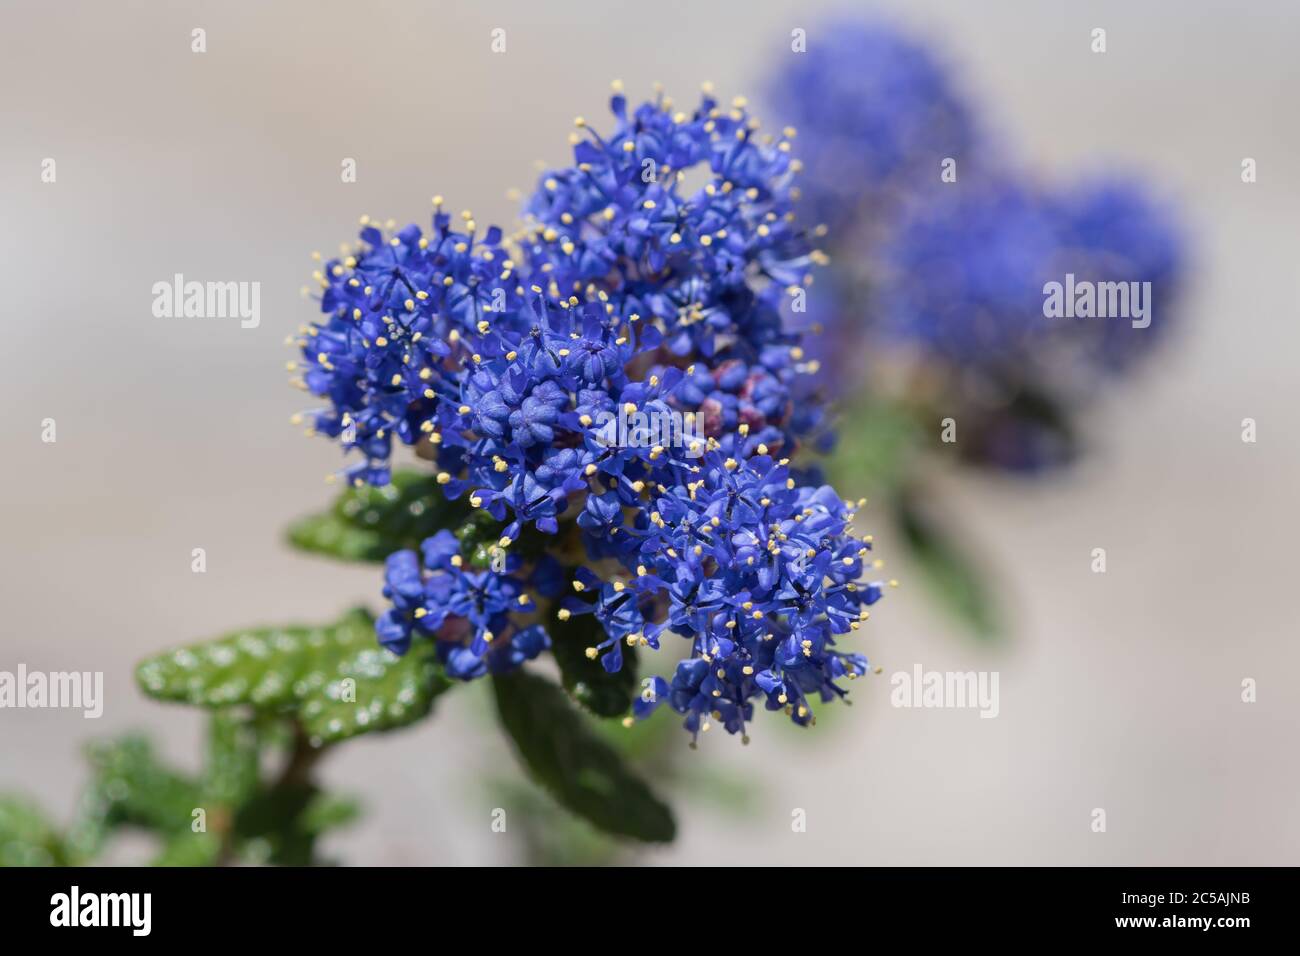 Close up of flowers on a California lilac (ceanothus) plant Stock Photo